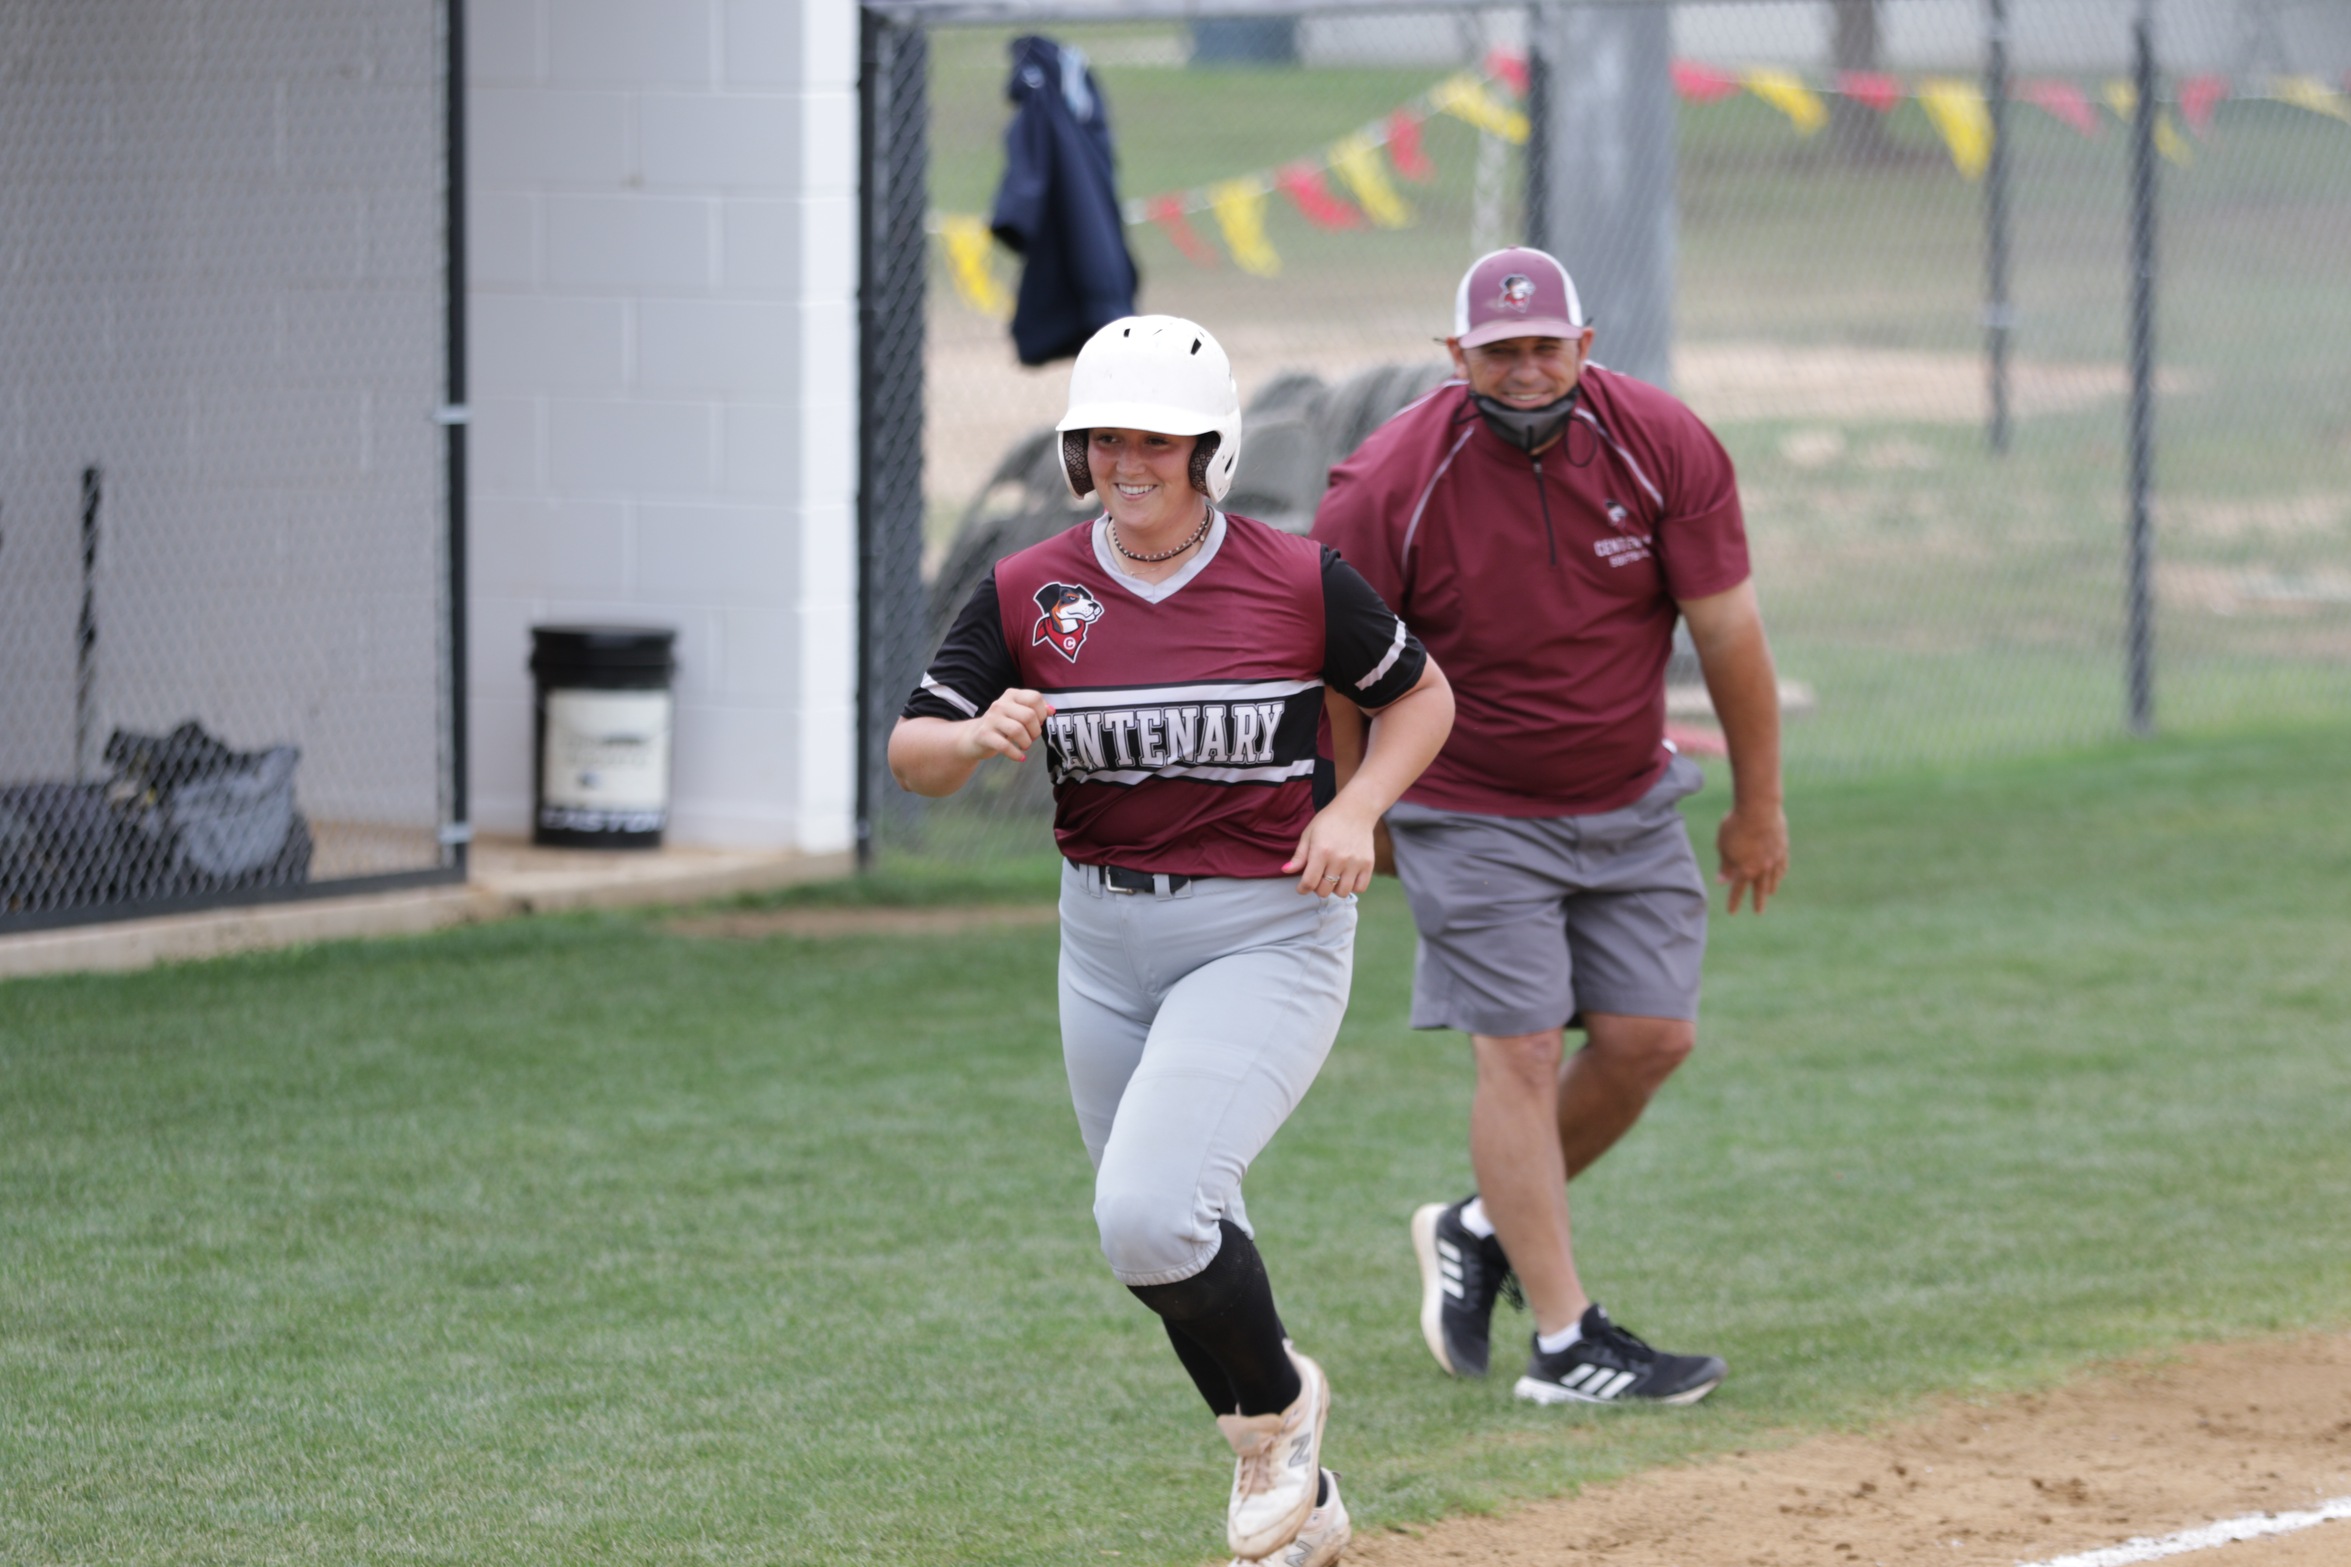 Softball's Season Ends With 2-1 Loss to Top-Ranked TLU In SCAC Championship Round